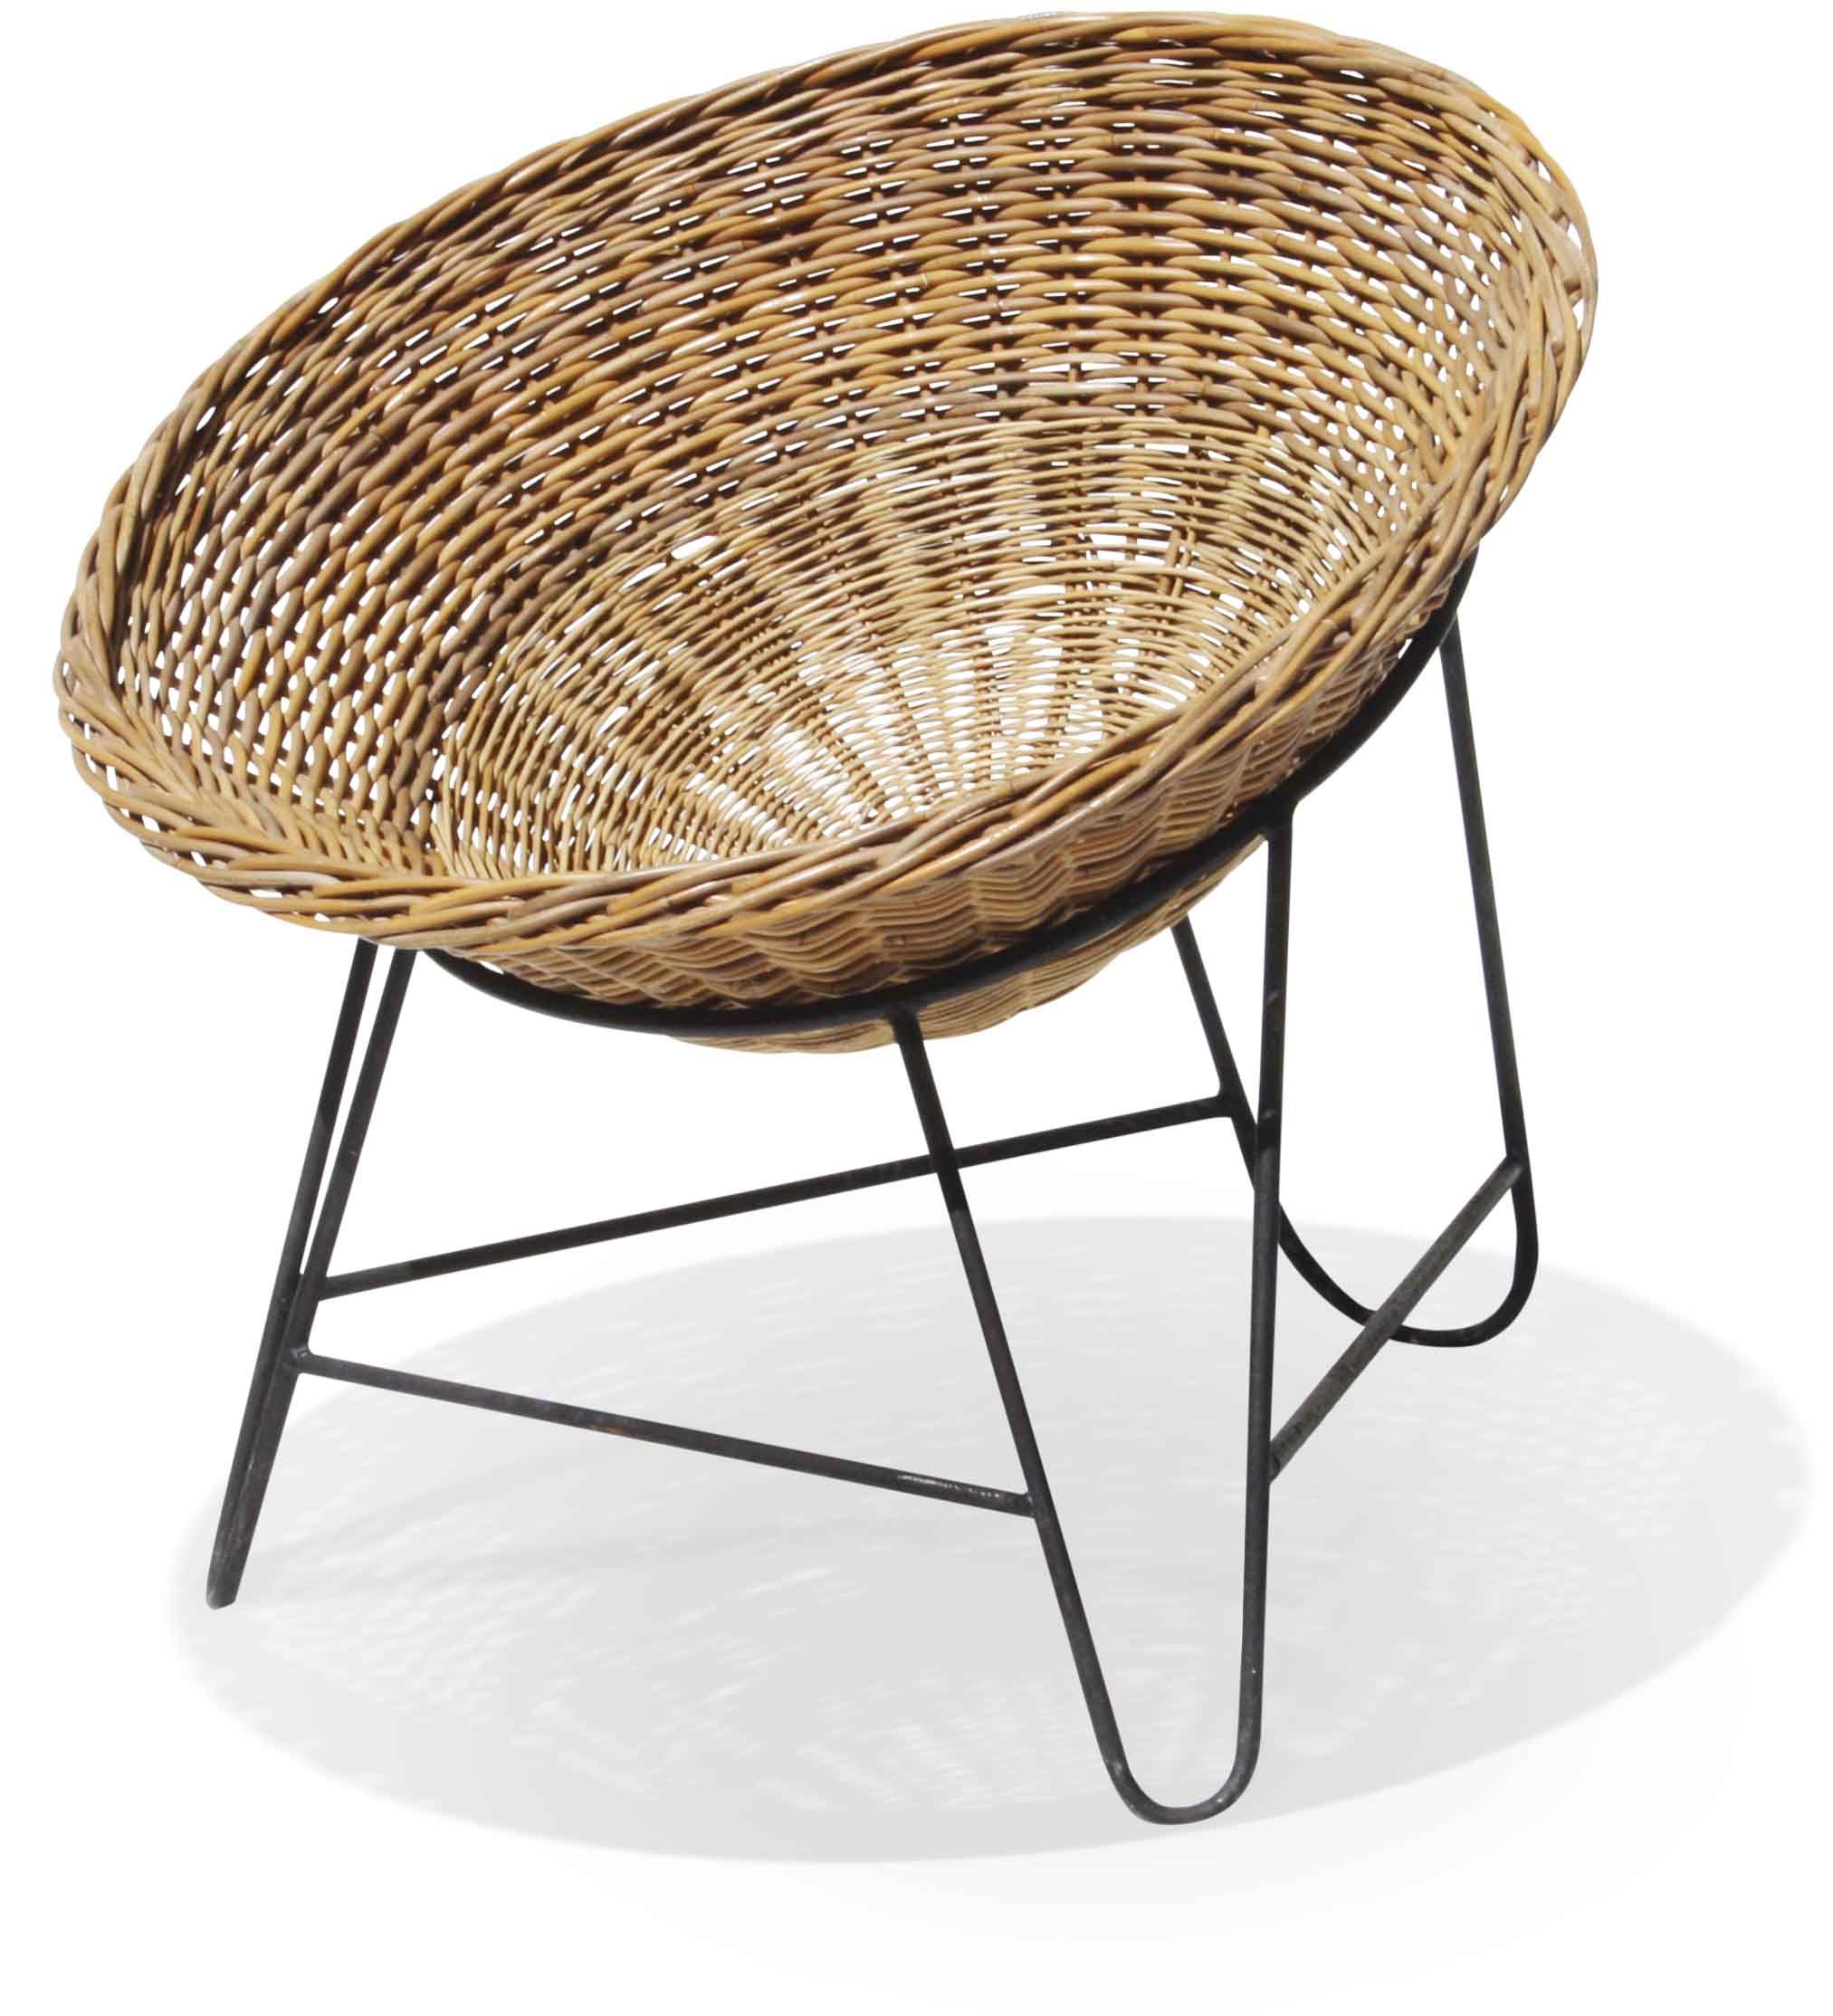 13 most iconic wicker chairs  historic wicker seating